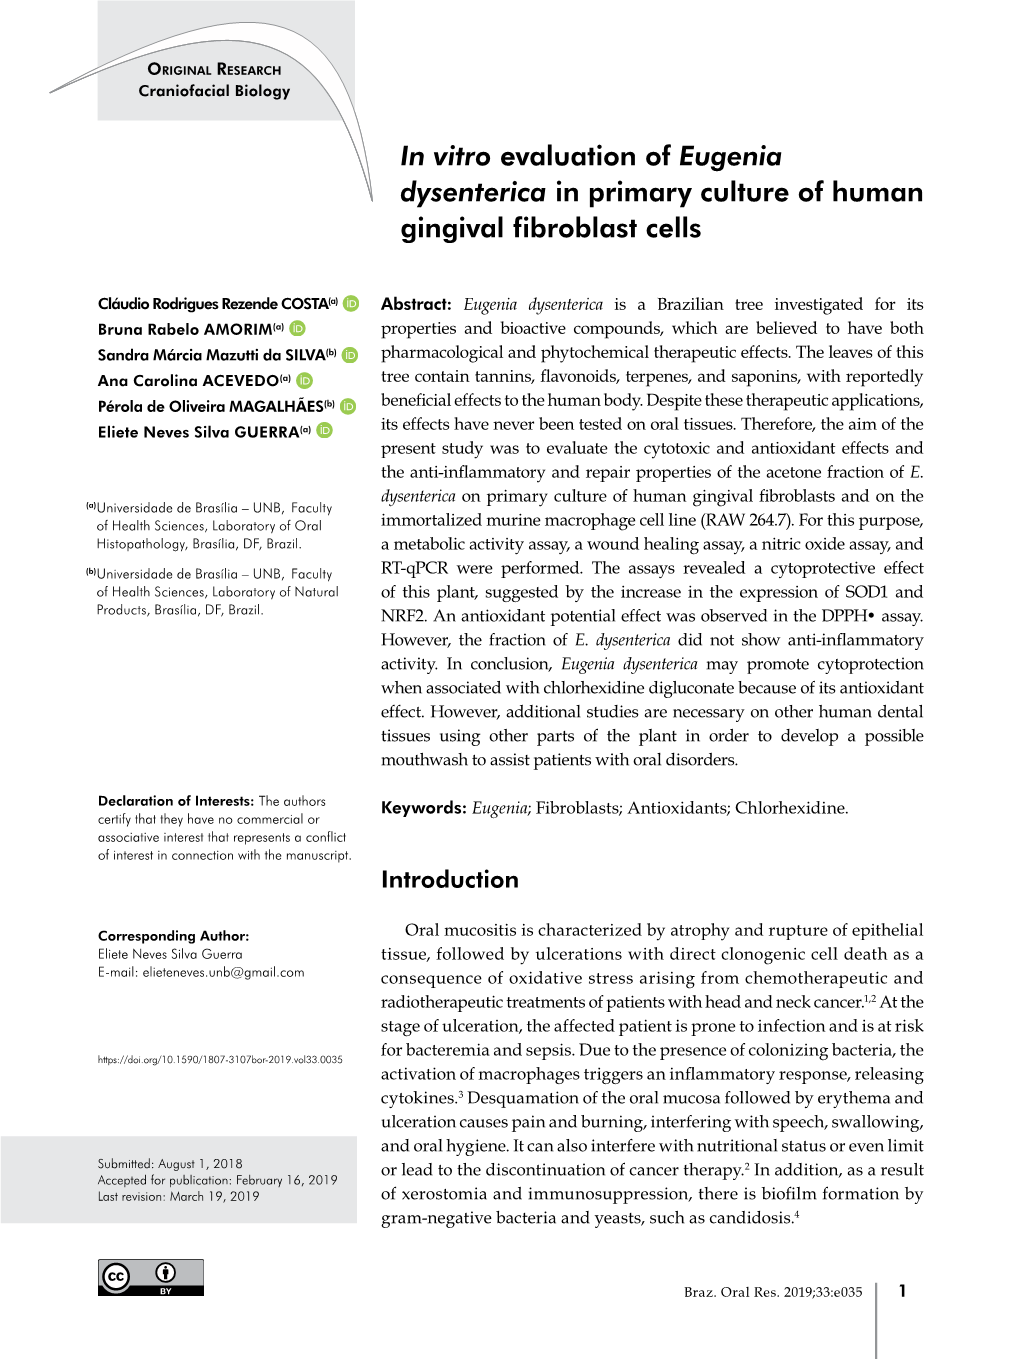 In Vitro Evaluation of Eugenia Dysenterica in Primary Culture of Human Gingival Fibroblast Cells